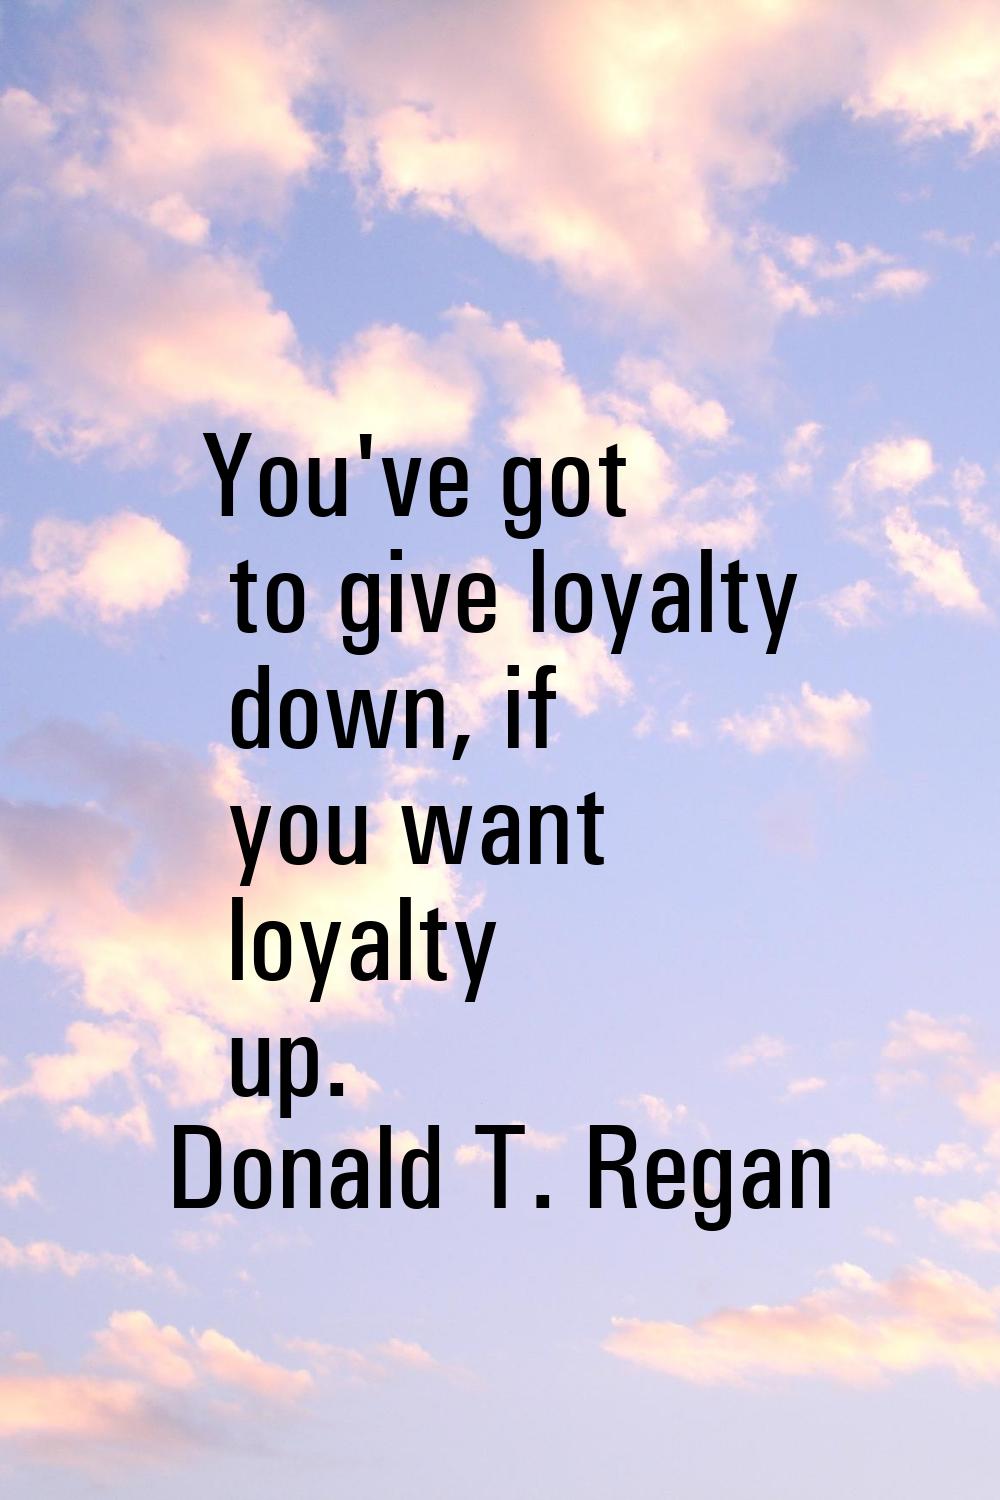 You've got to give loyalty down, if you want loyalty up.